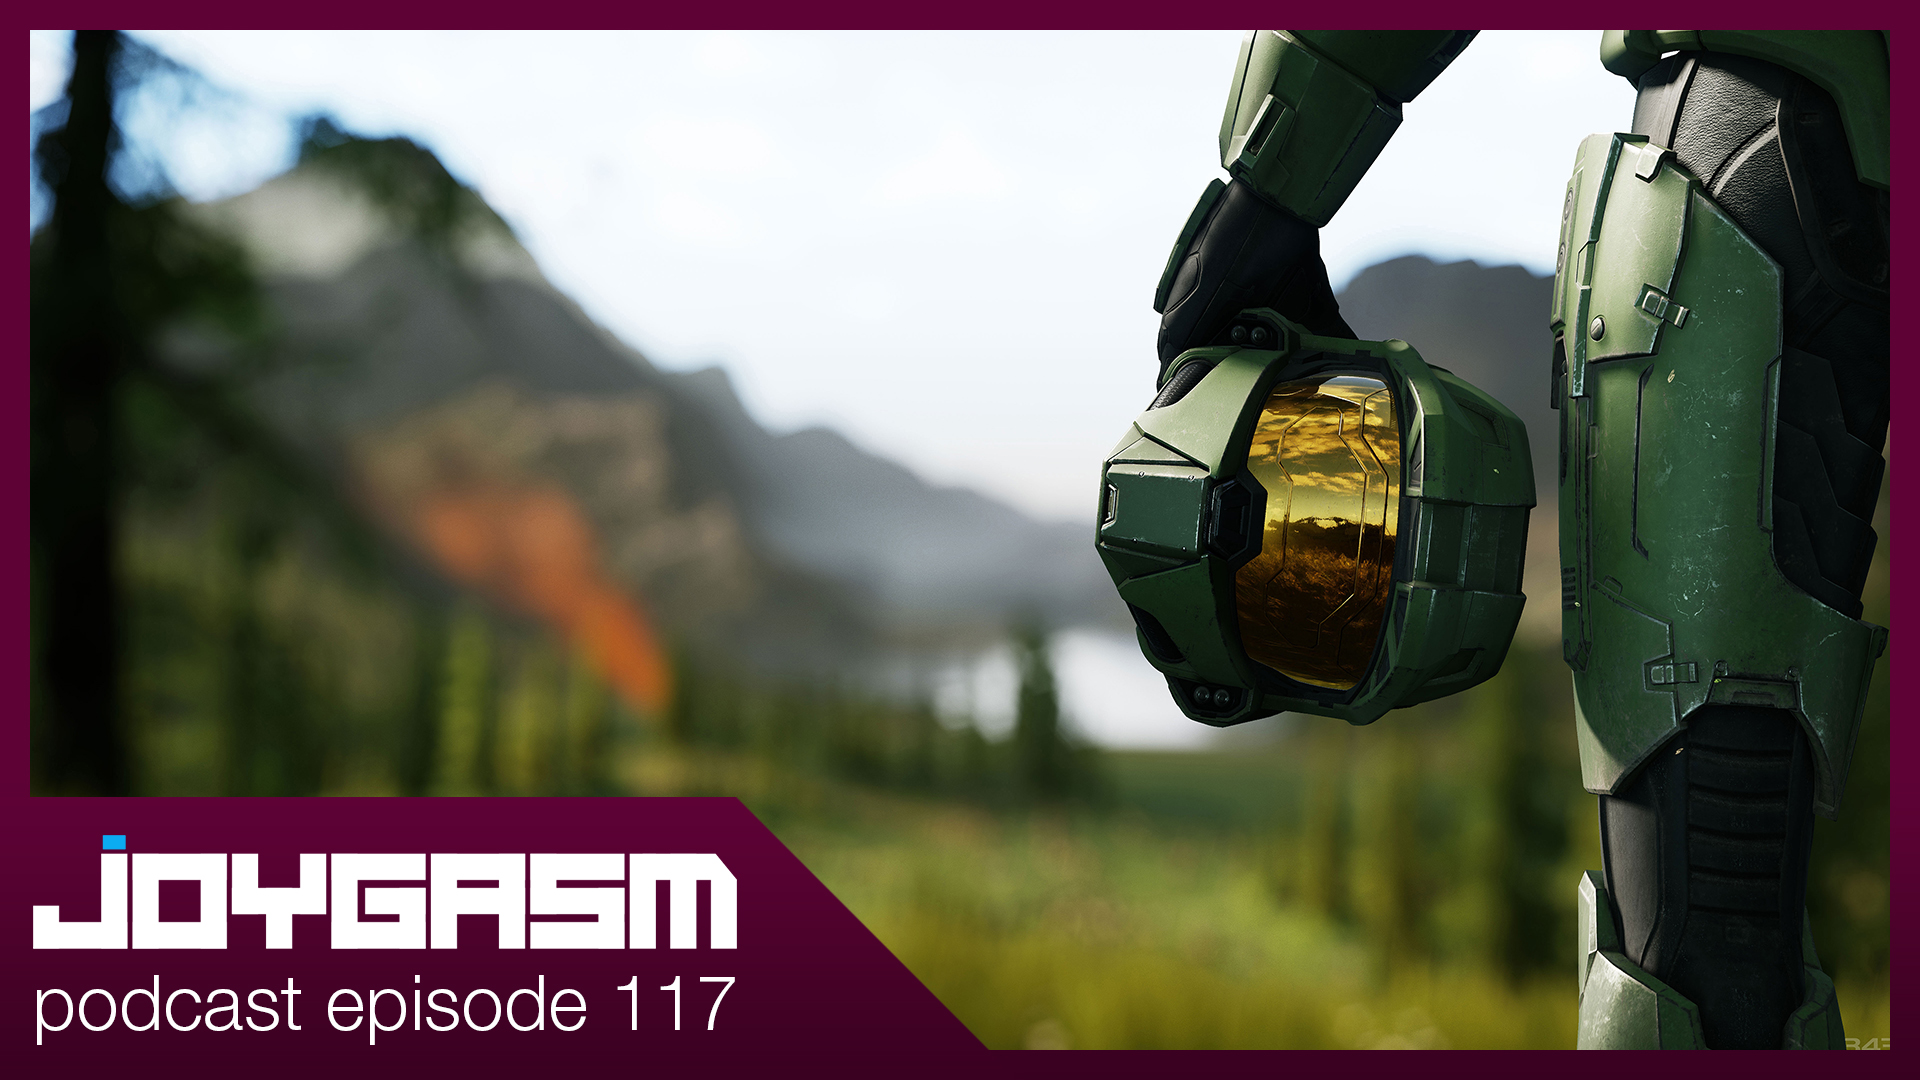 Ep. 117: Halo Memoirs, Star Wars The Rise Of Skywalker Trailer, & More